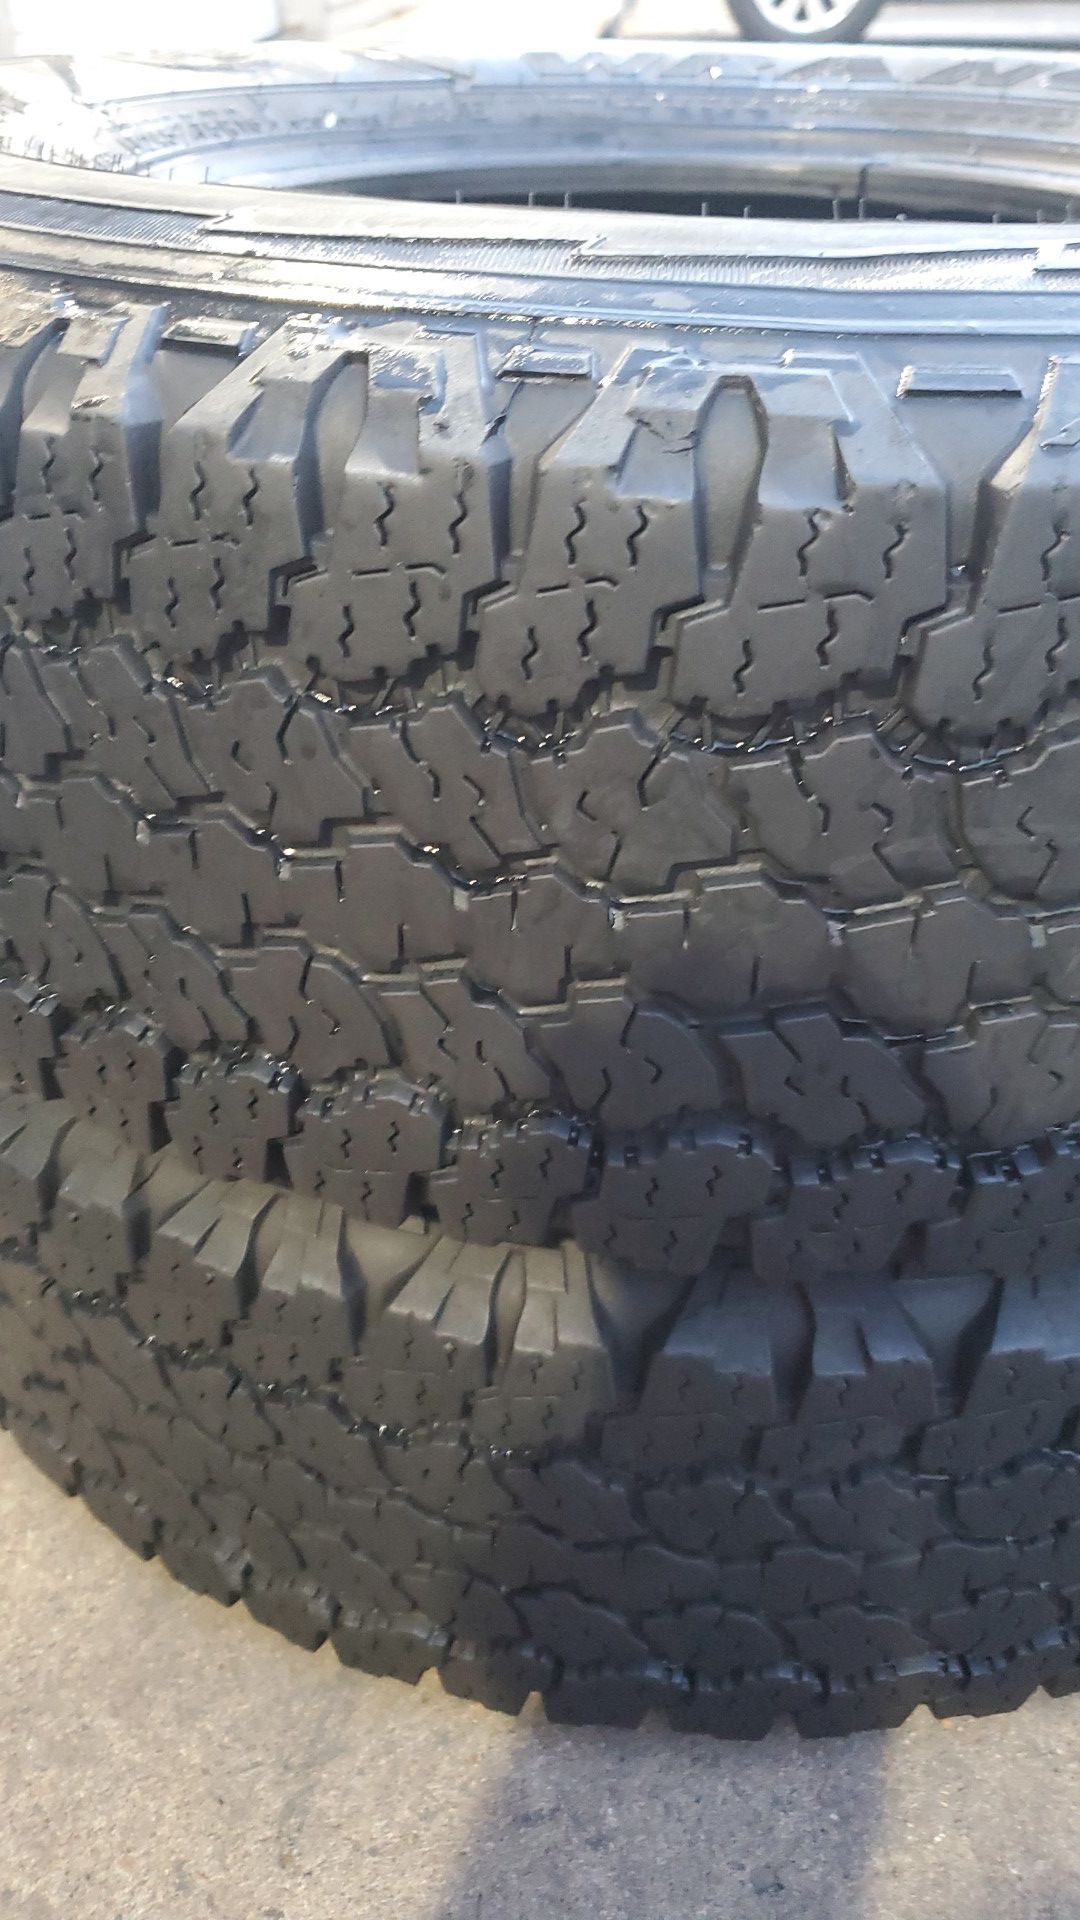 Two very nice GOOD YEAR tires for sale. LT245/75/16